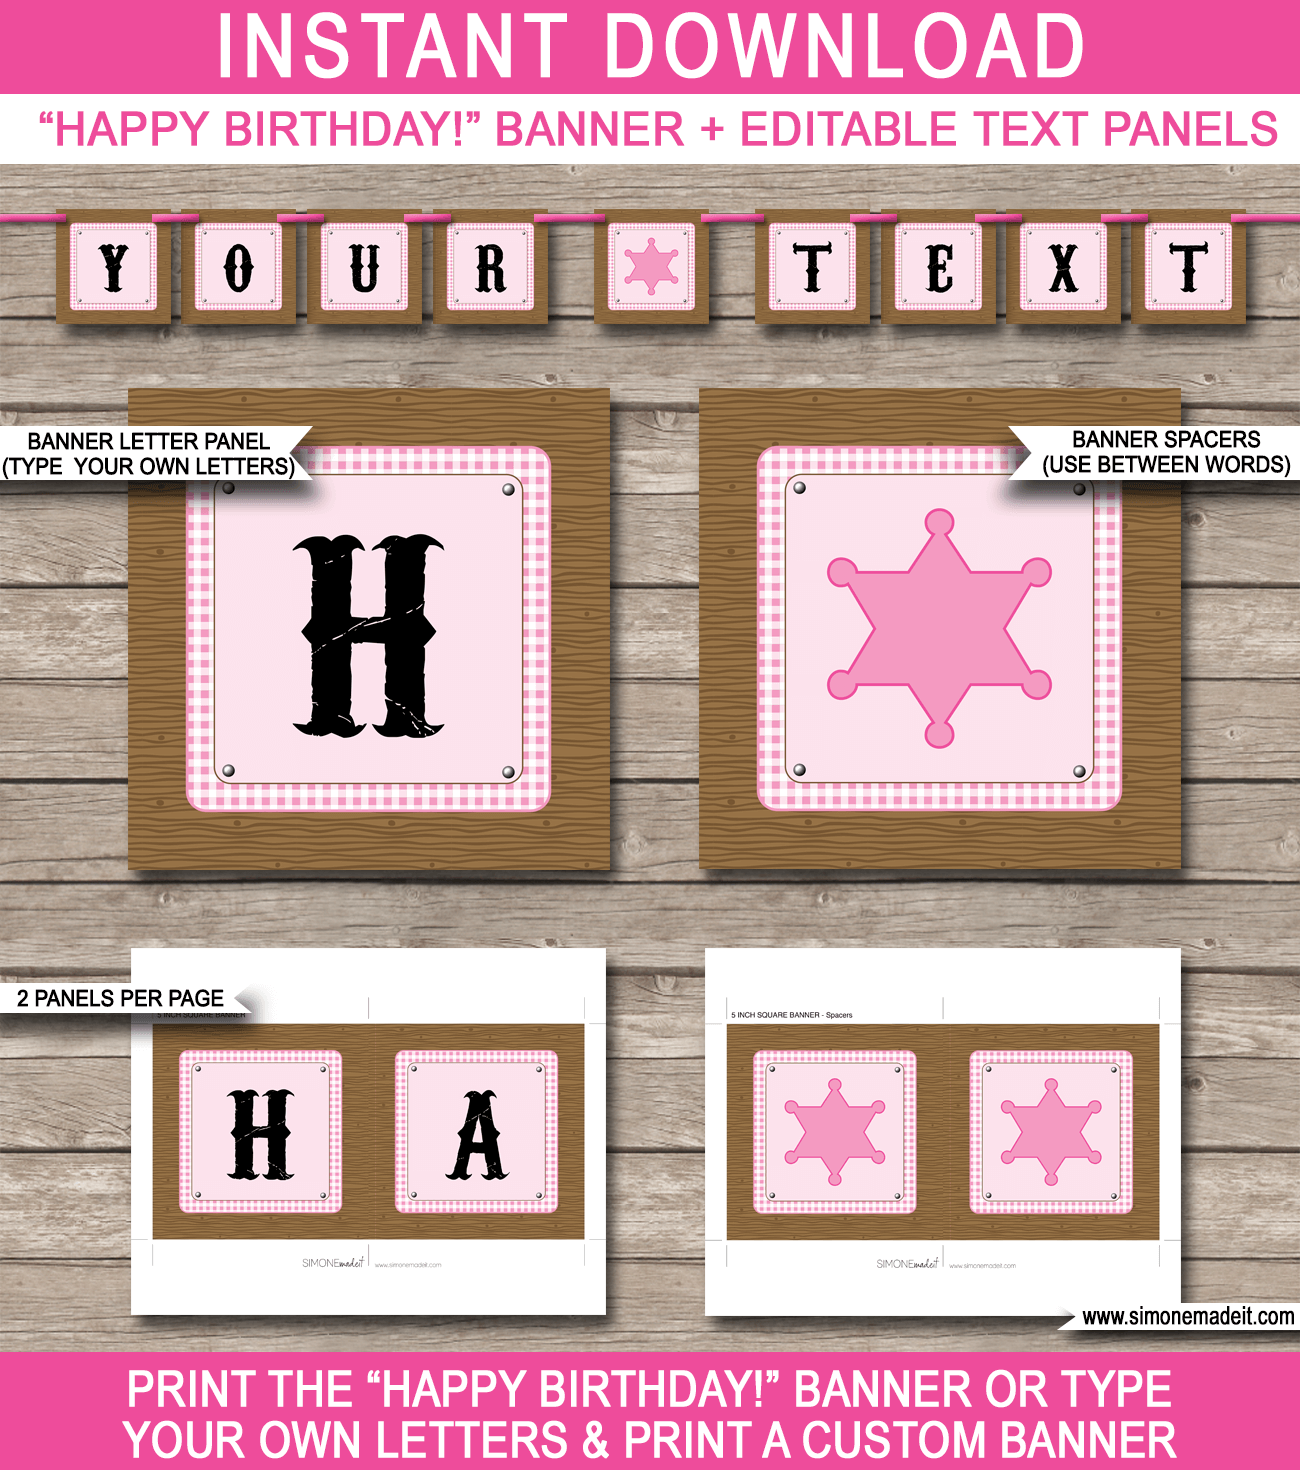 Cowgirl Party Banner Template - Cowgirl Bunting - Happy Birthday Banner - Birthday Party - Editable and Printable DIY Template - INSTANT DOWNLOAD $4.50 via simonemadeit.com